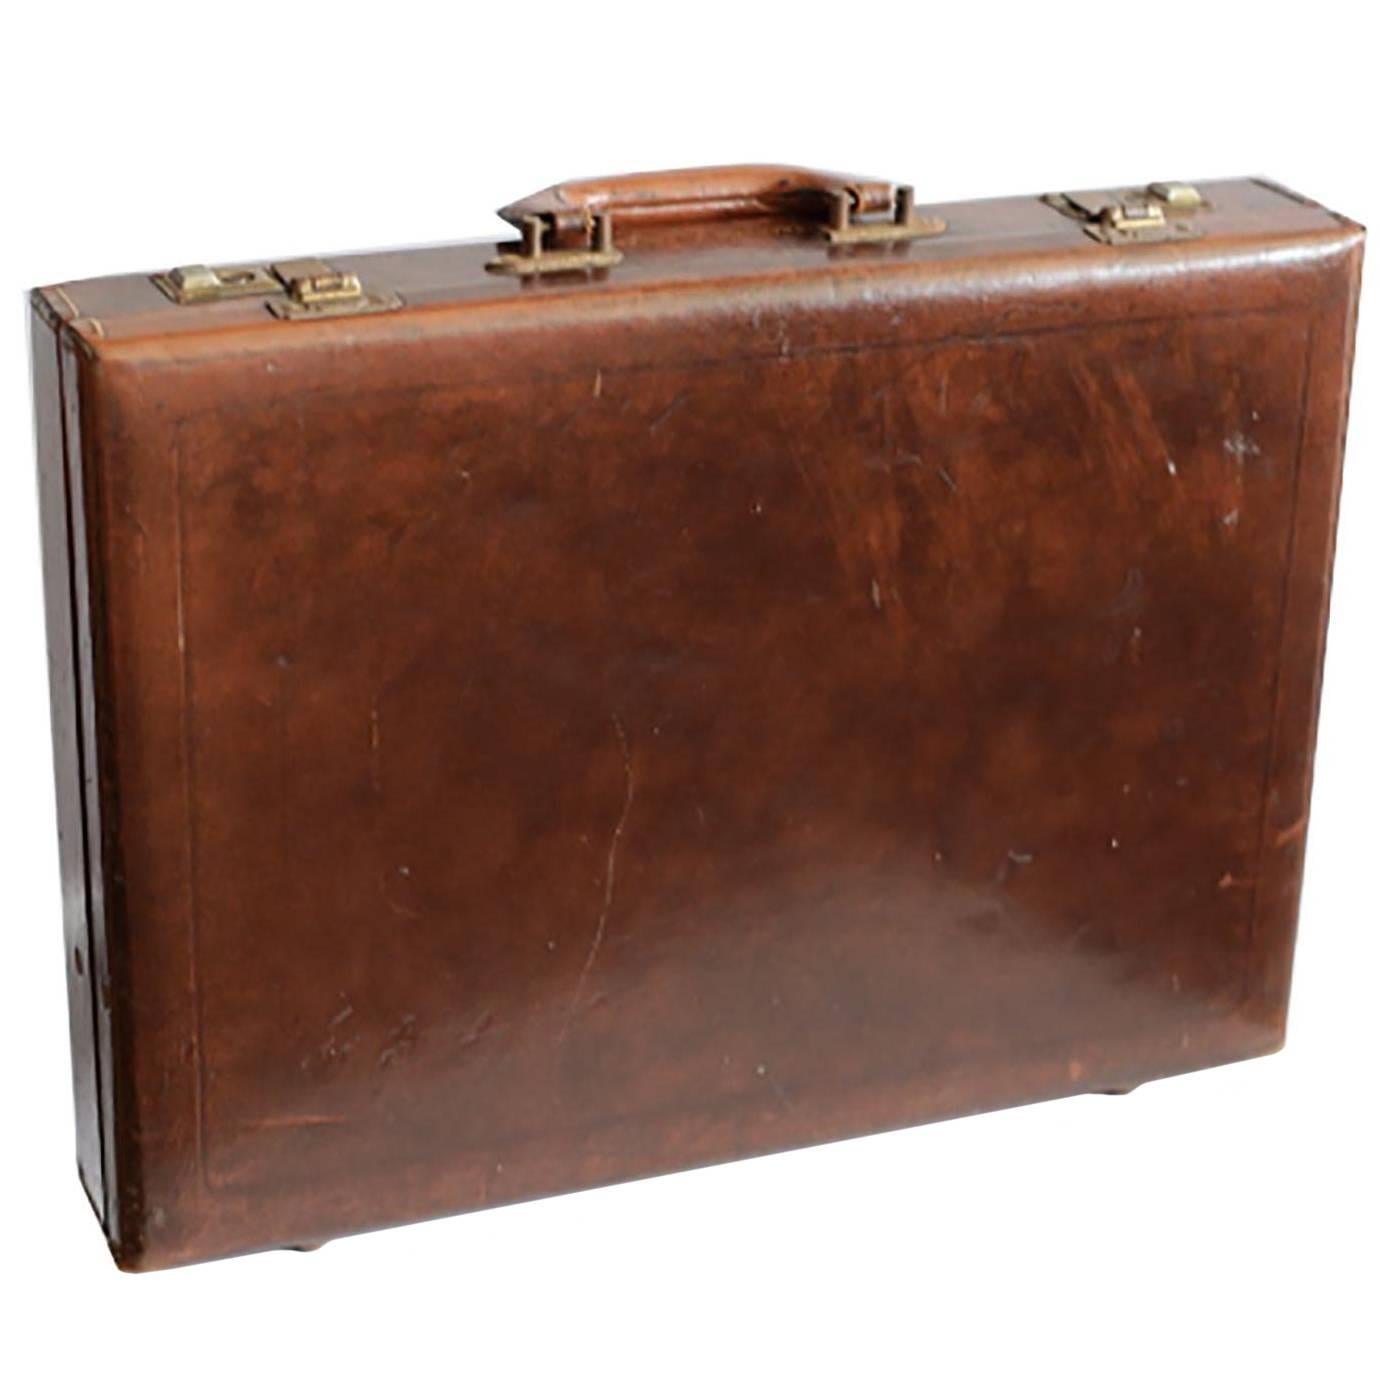 Midcentury Hand-Stitched Leather and Brass Briefcase, circa 1970